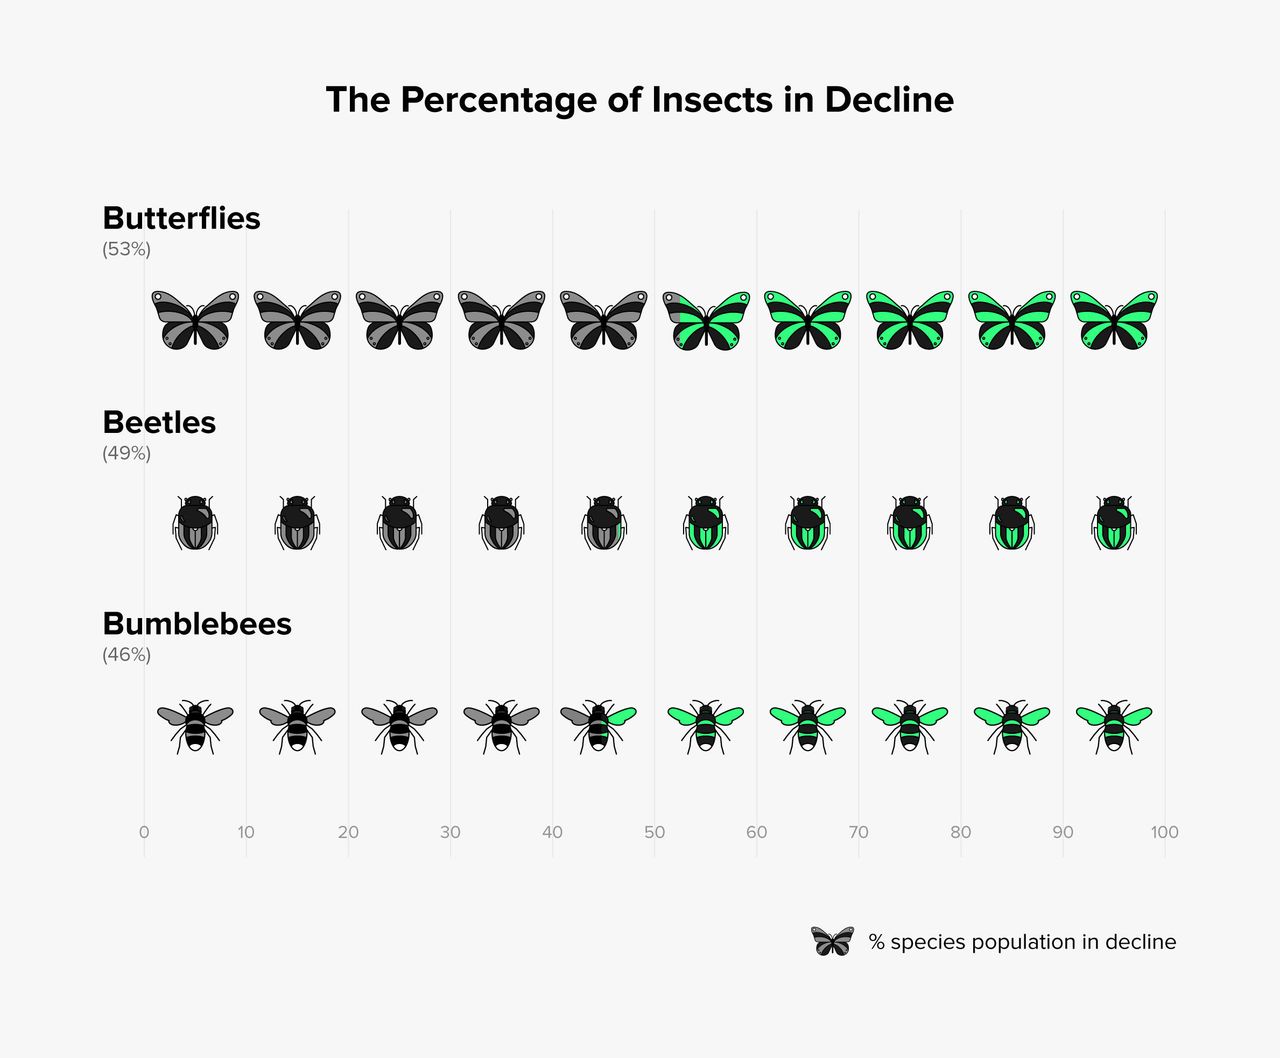 A major assessment of insect studies conducted over the last few decades found that 41 percent of insects are in decline. Source: Sánchez-Bayoa and Wyckhuy, Biological Conservation, 2019